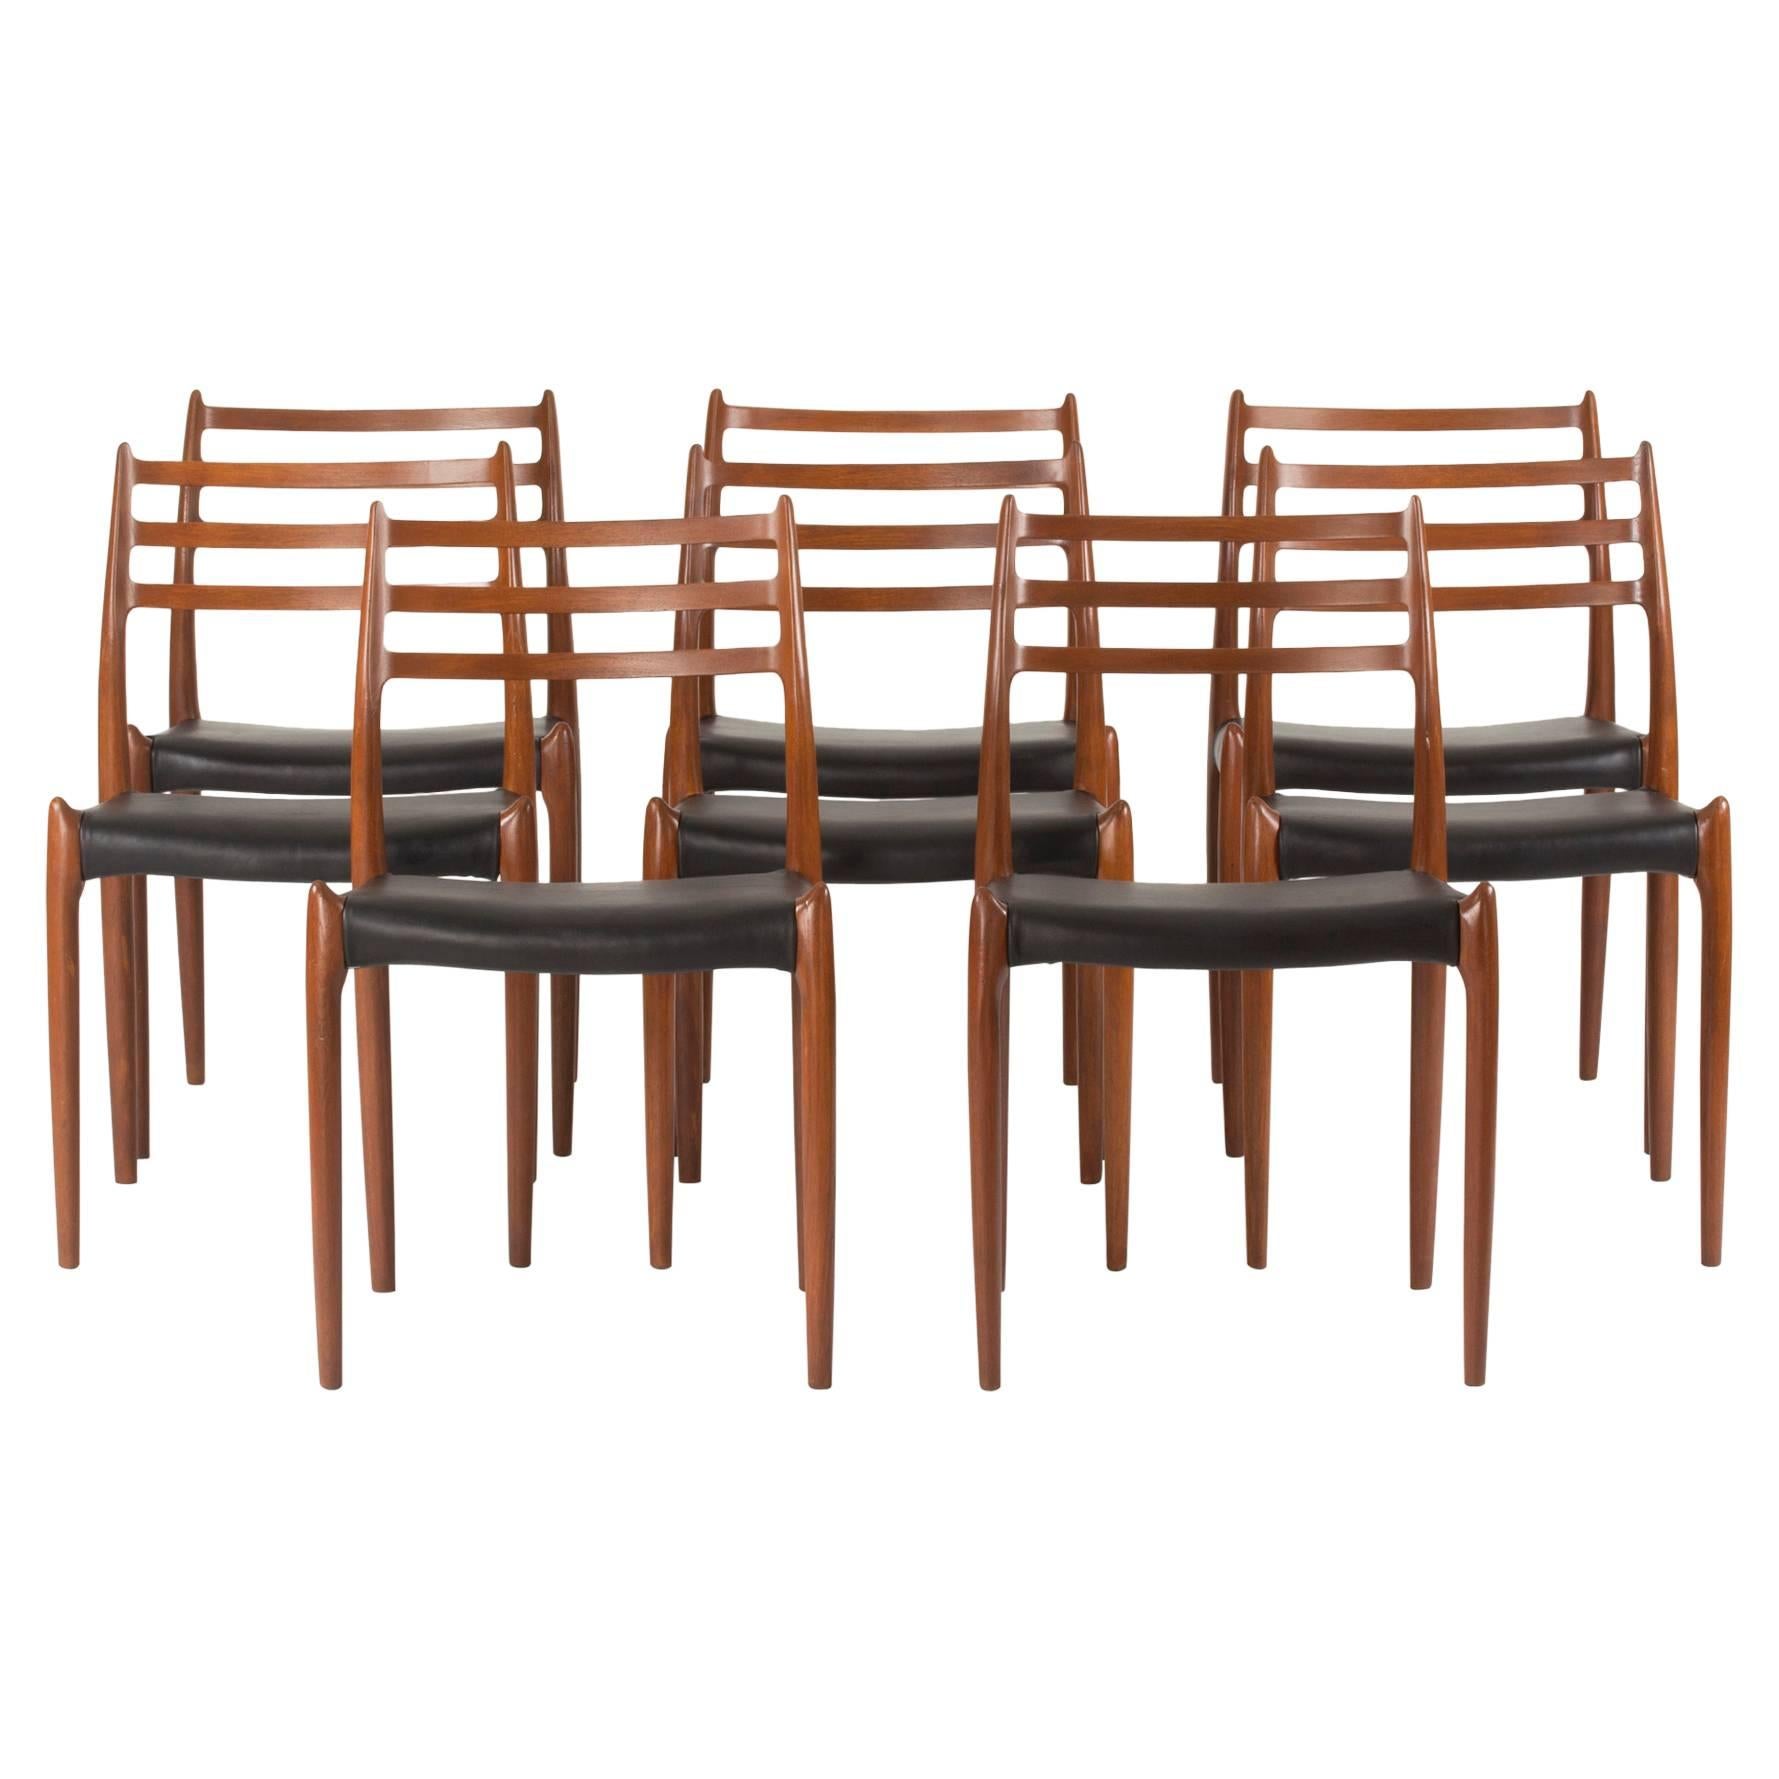 Set of Eight Teak Dining Chairs by Niels O. Møller